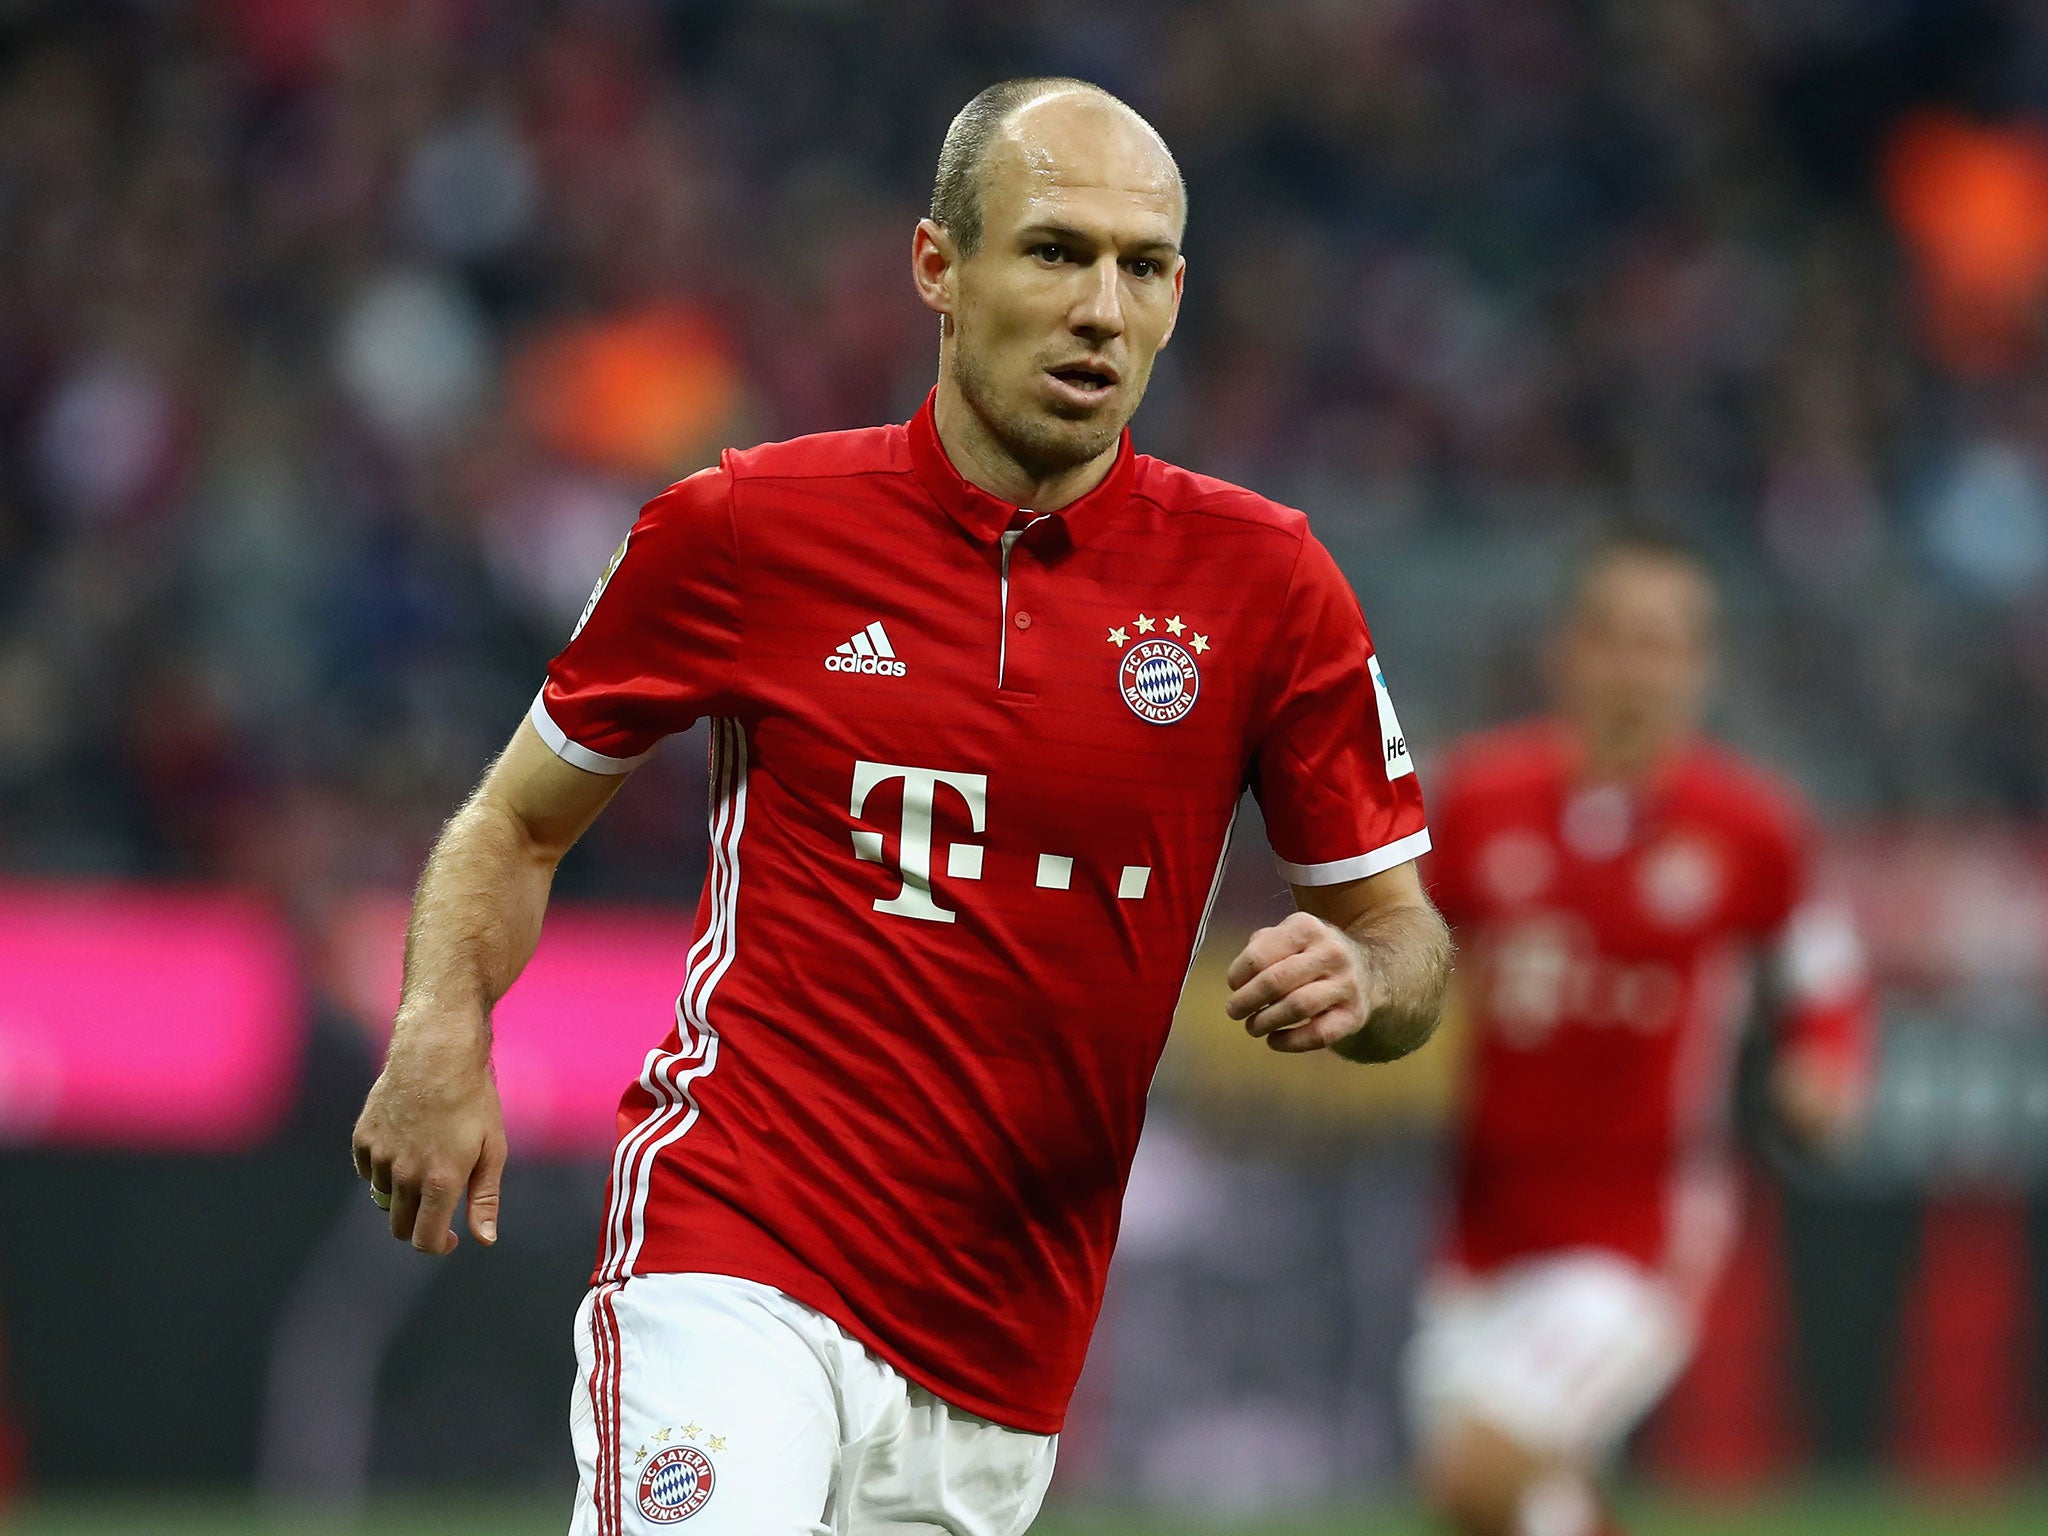 Arjen Robben believes Bayern Munich's Champions League expectations vastly outweigh Arsenal's